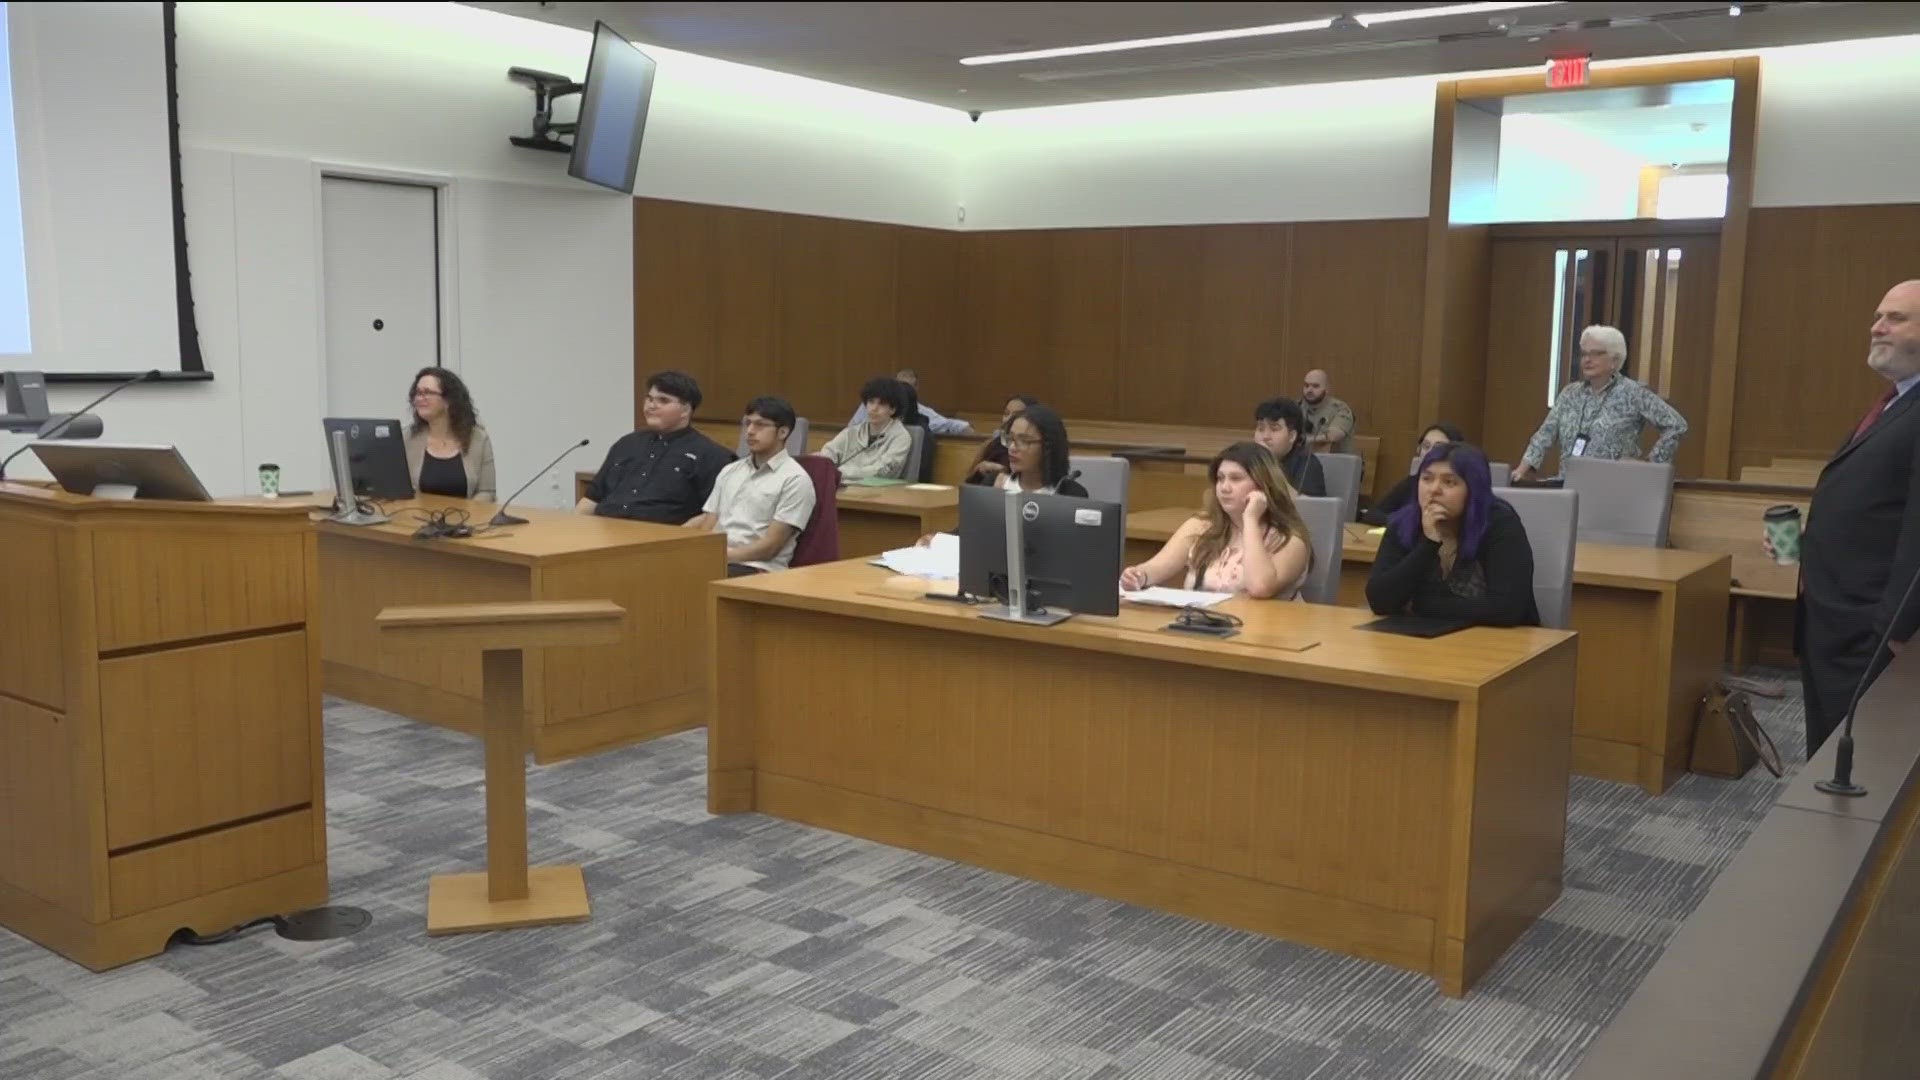 Travis County high school students jumped into the legal world for a mock trial in a real courtroom on Thursday.